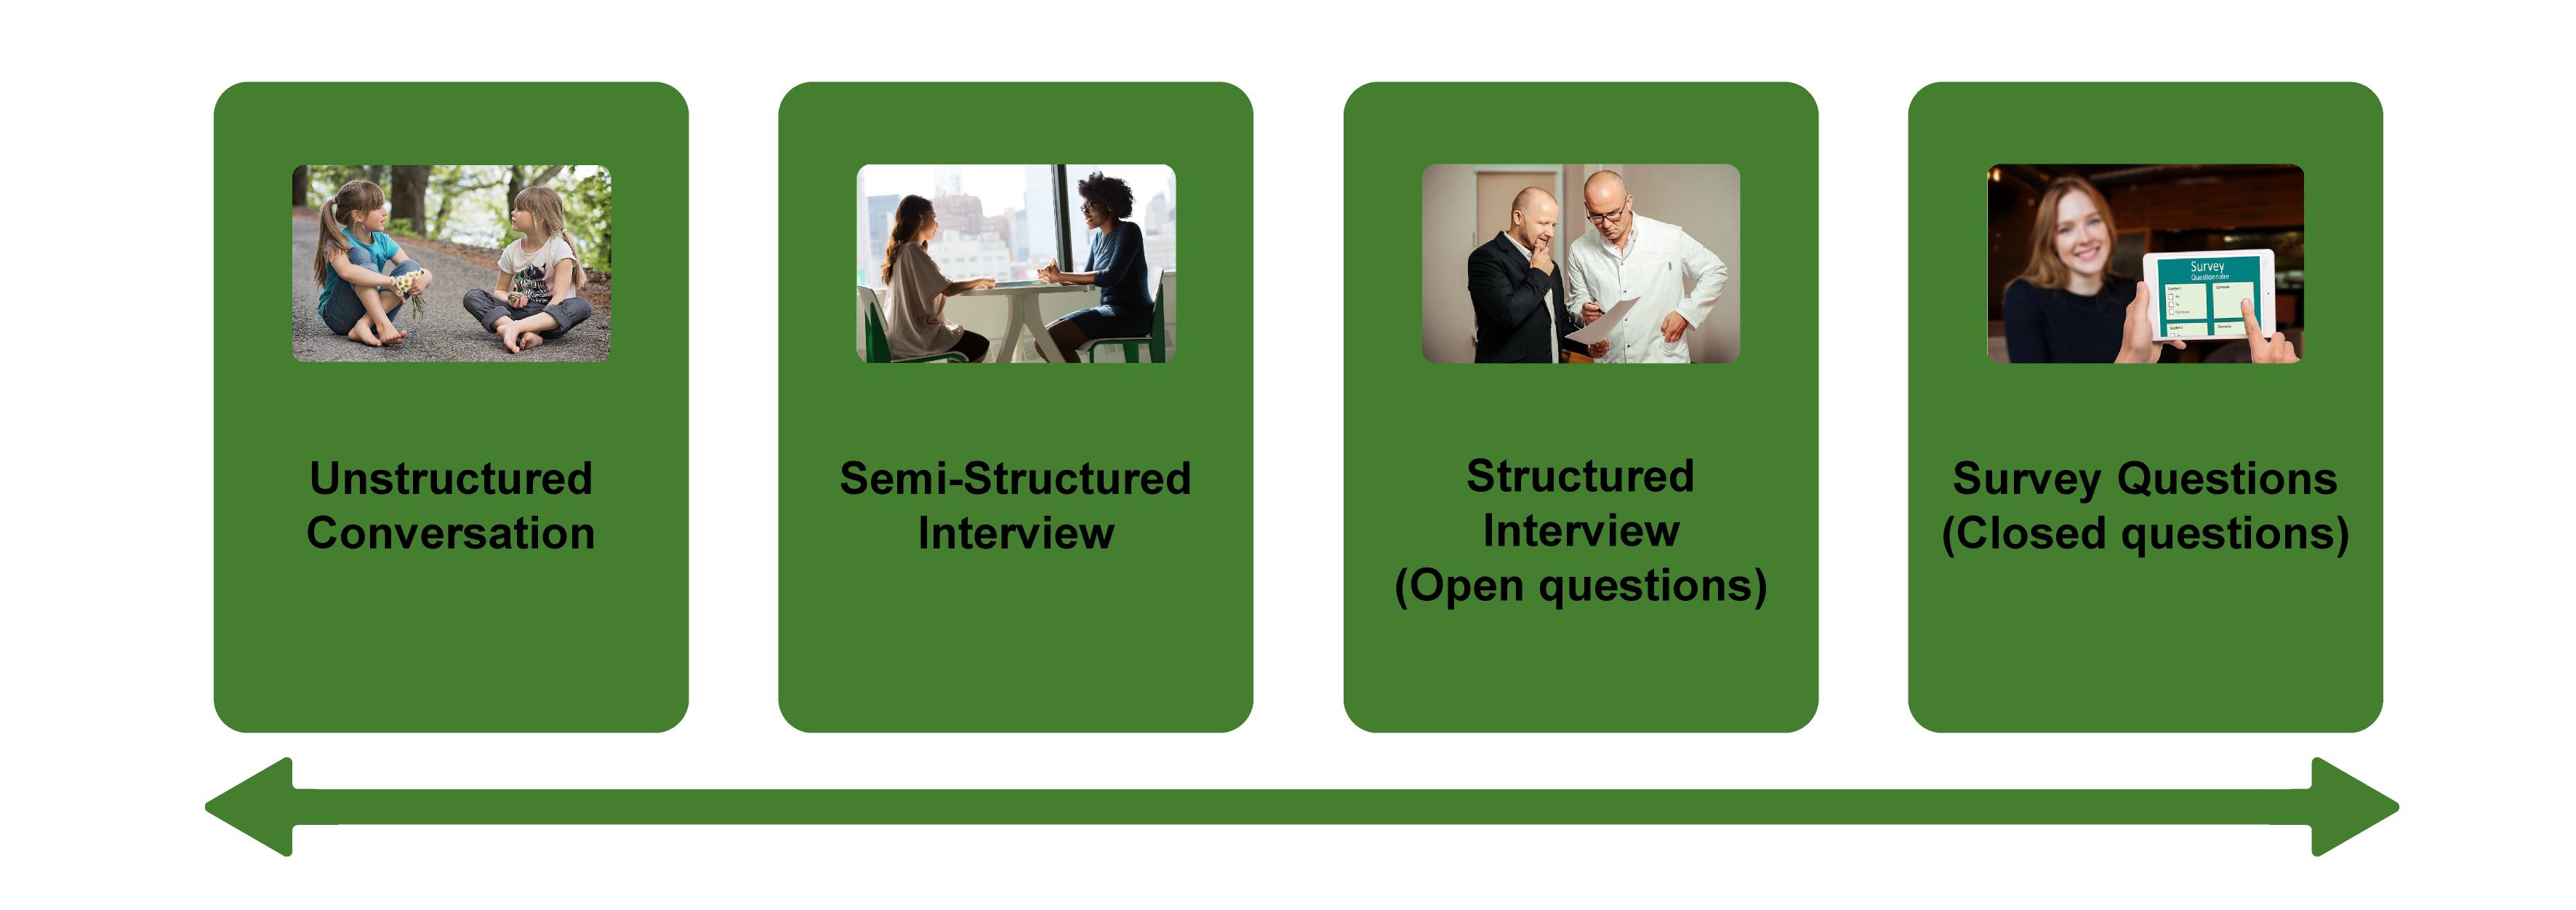 Types of Interviewing Questions: Unstructured conversations, Semi-structured interview, Structured interview, Survey questions